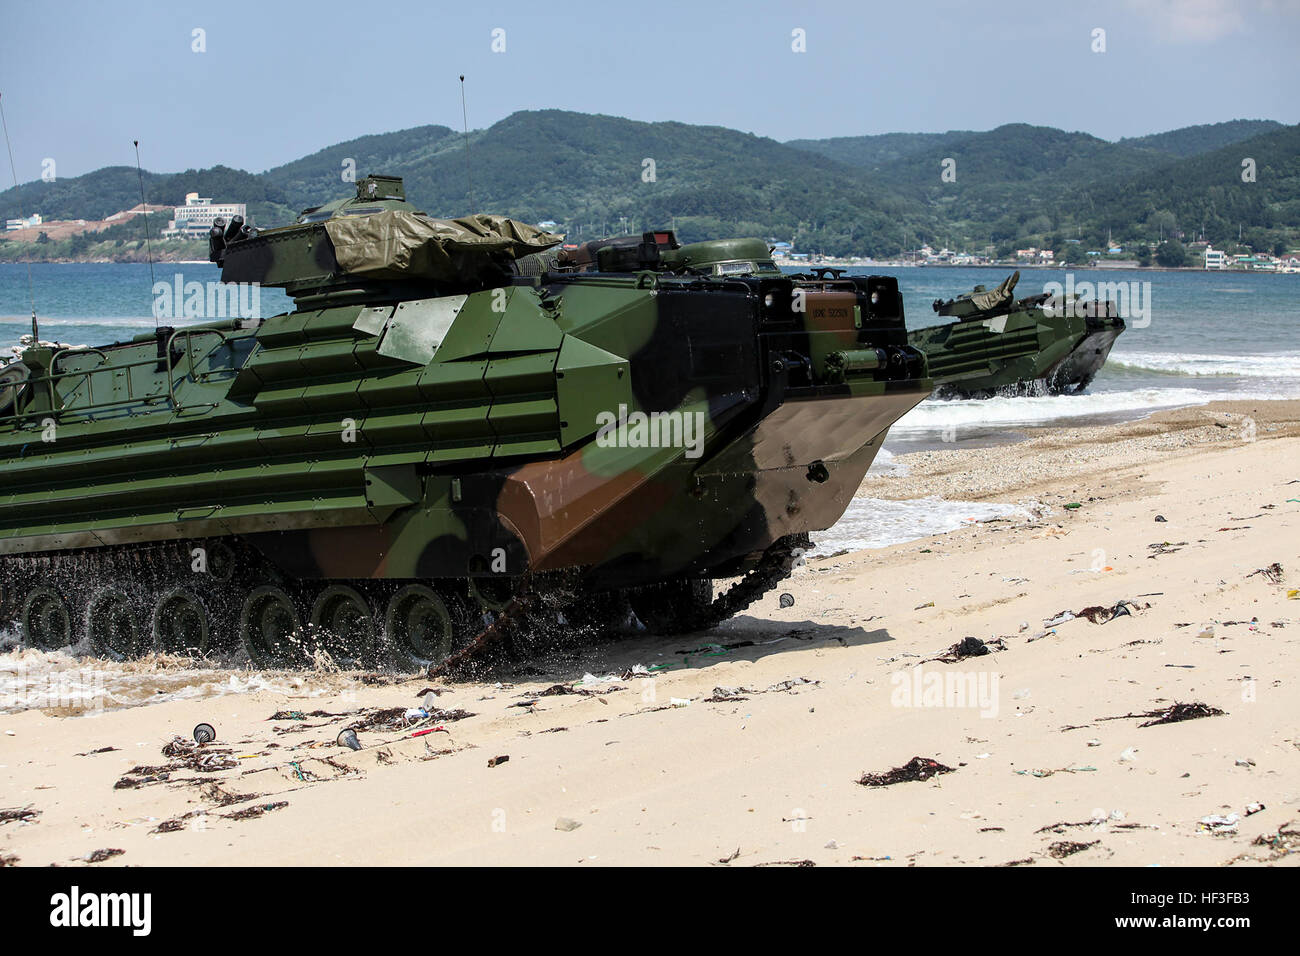 U.S. Marine Corps Amphibious Assualt Vehicles (AAV) with Alpha Company, 4th Assault Amphibian Battalion, 4th Marine Division, Marine Forces Reserve hits the surf during the amphibious operations portion of Korean Marine Exchange Program 15-8 at Deagu Beach in Pohang, South Korea as a part of Peninsula Express 15, July 1, 2015. Peninsula Express is one in a series of regularly-scheduled combined, small-unit, tactical training exercises that demonstrates continued dedication to the ROK-U.S. relationship, contributing to the security and stability of the Korean Peninsula and Asia-Pacific region.  Stock Photo